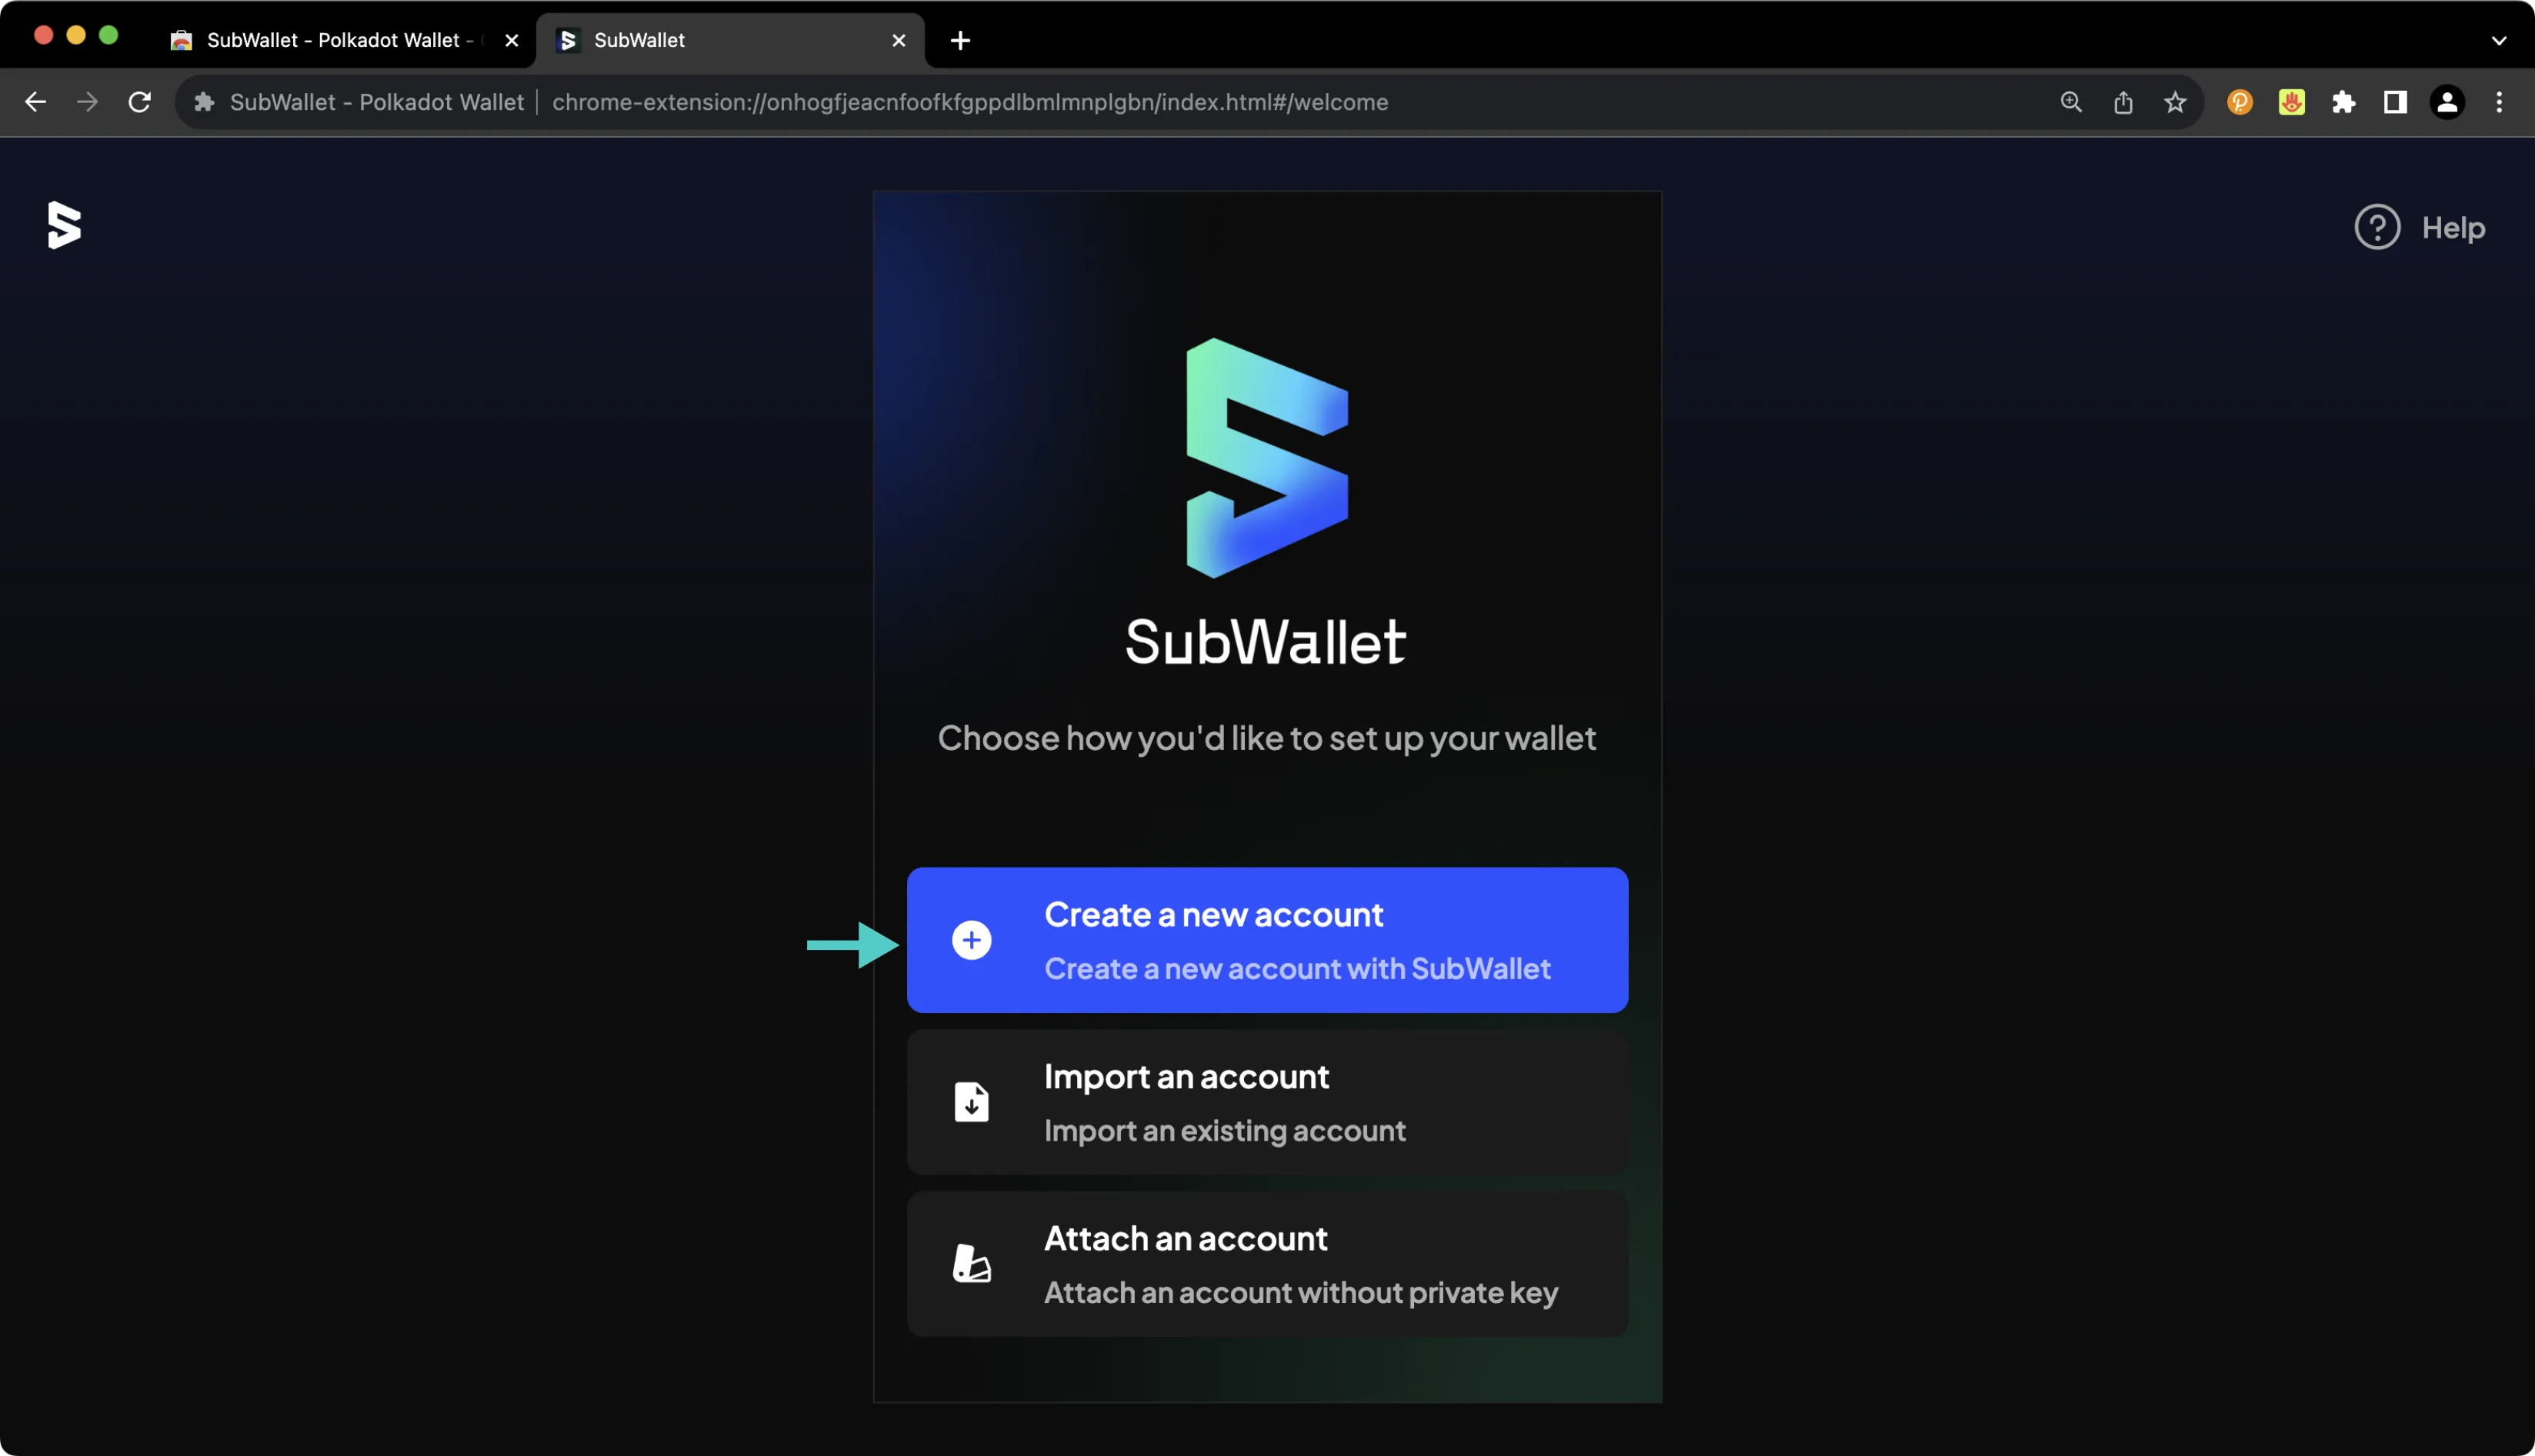 Get started with SubWallet